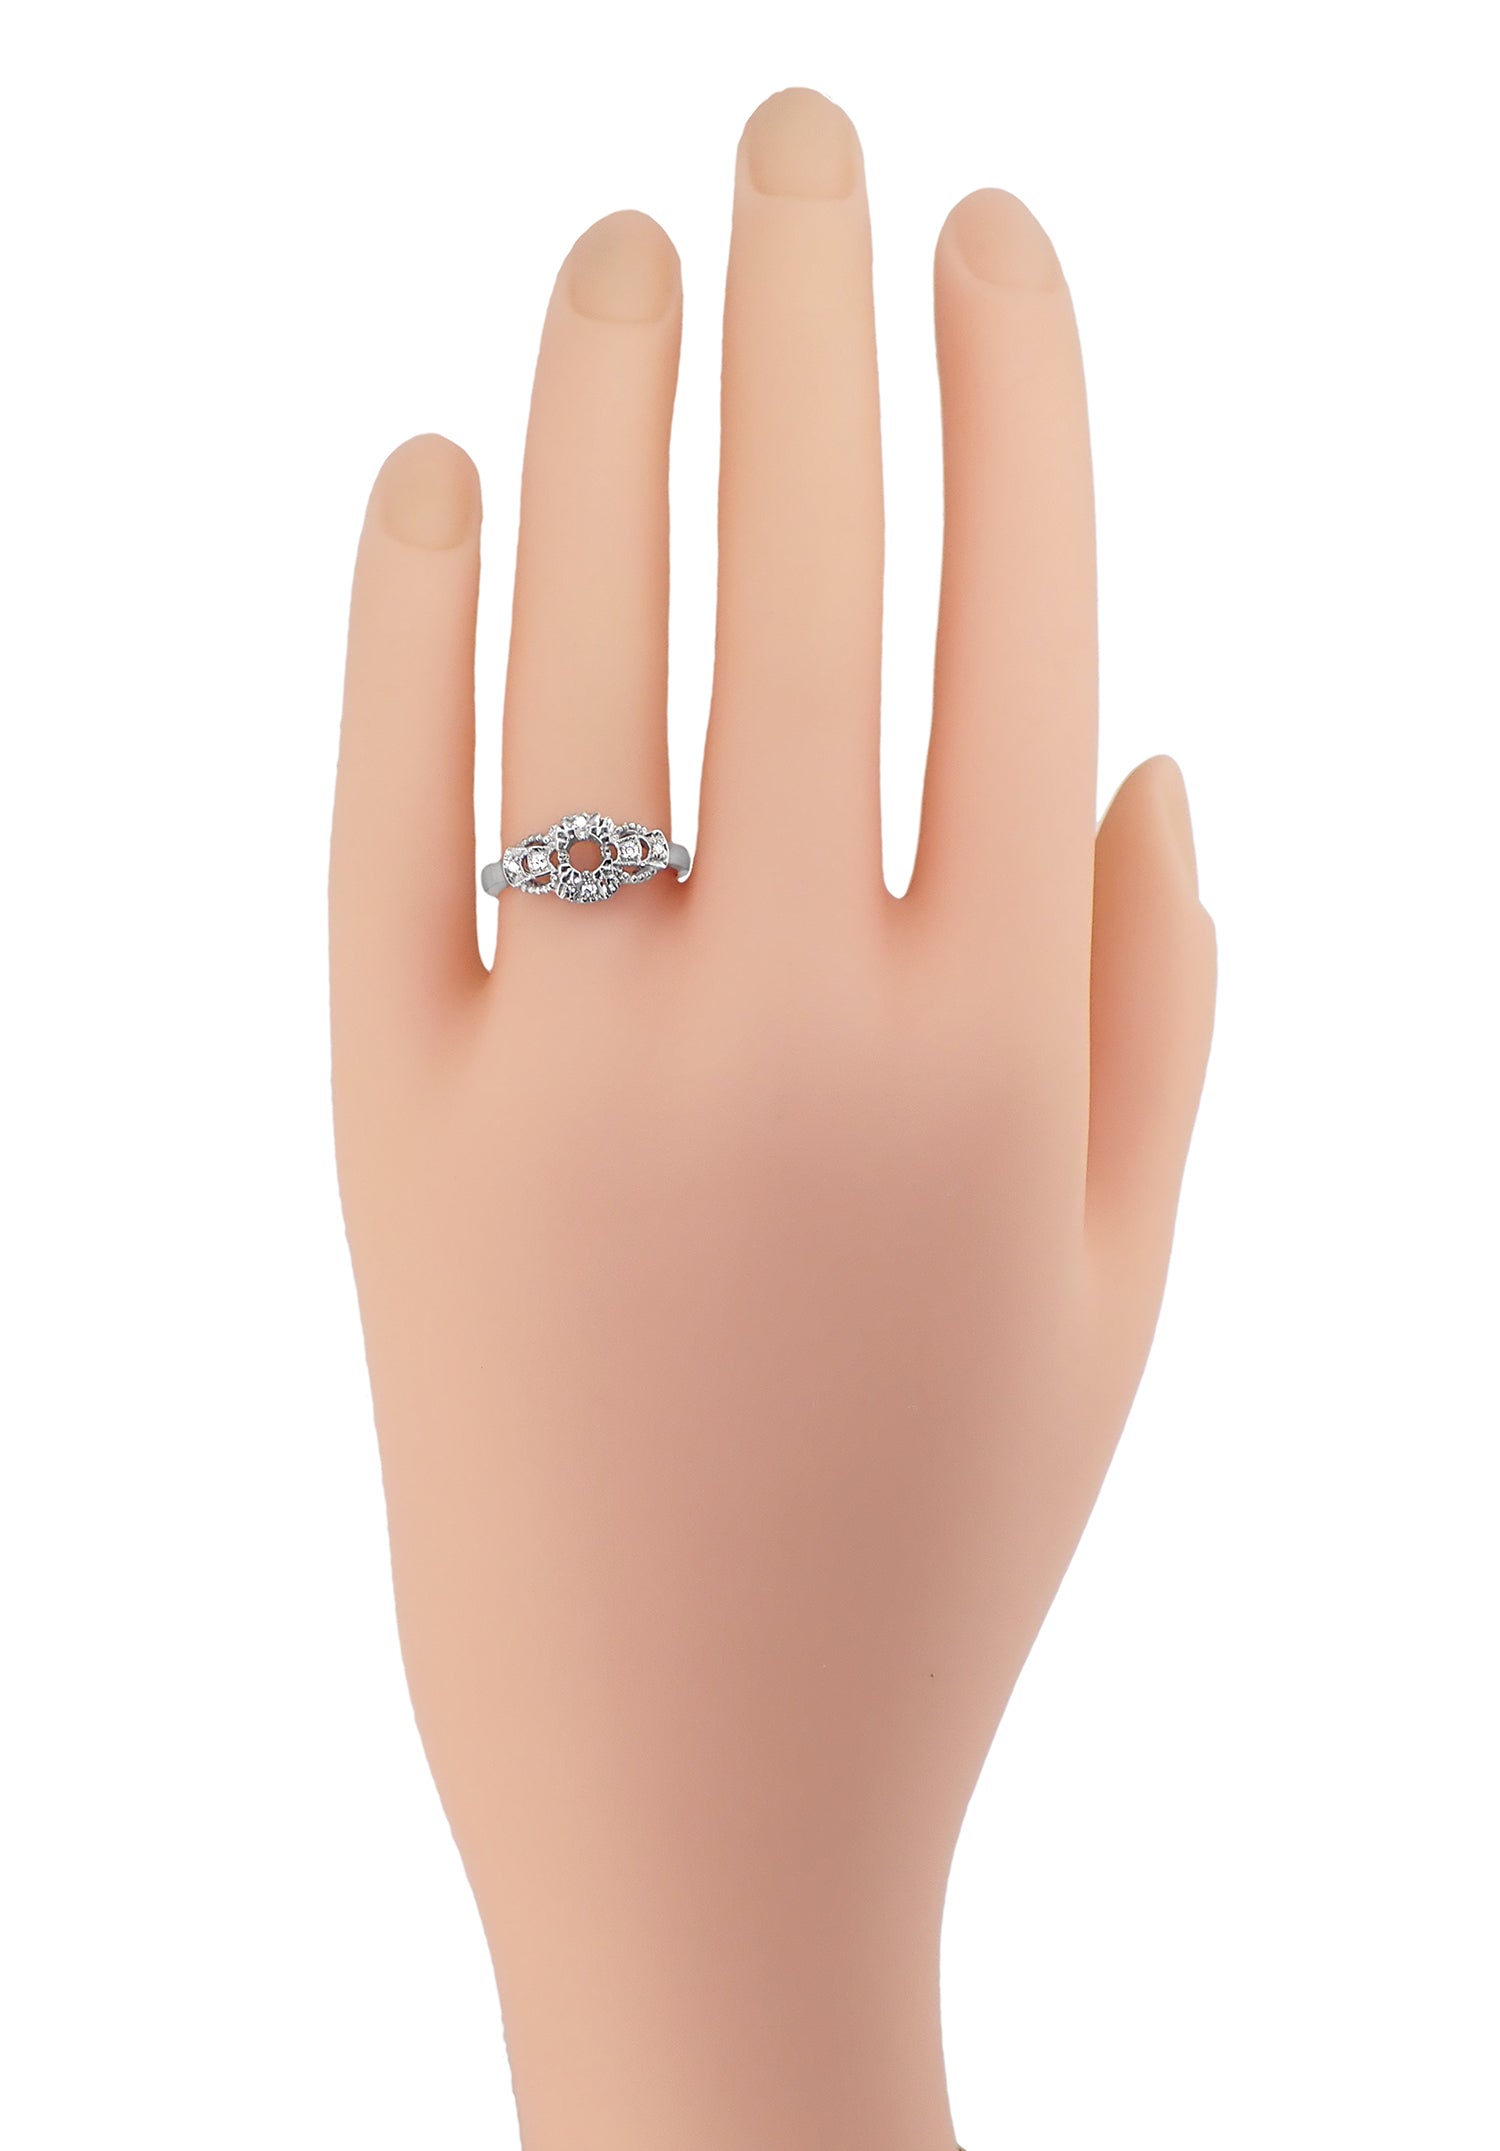 Filigree East to West Art Deco Engagement Ring Setting in White Gold for a 1/4 Carat Round Diamond - Item: R680W - Image: 4